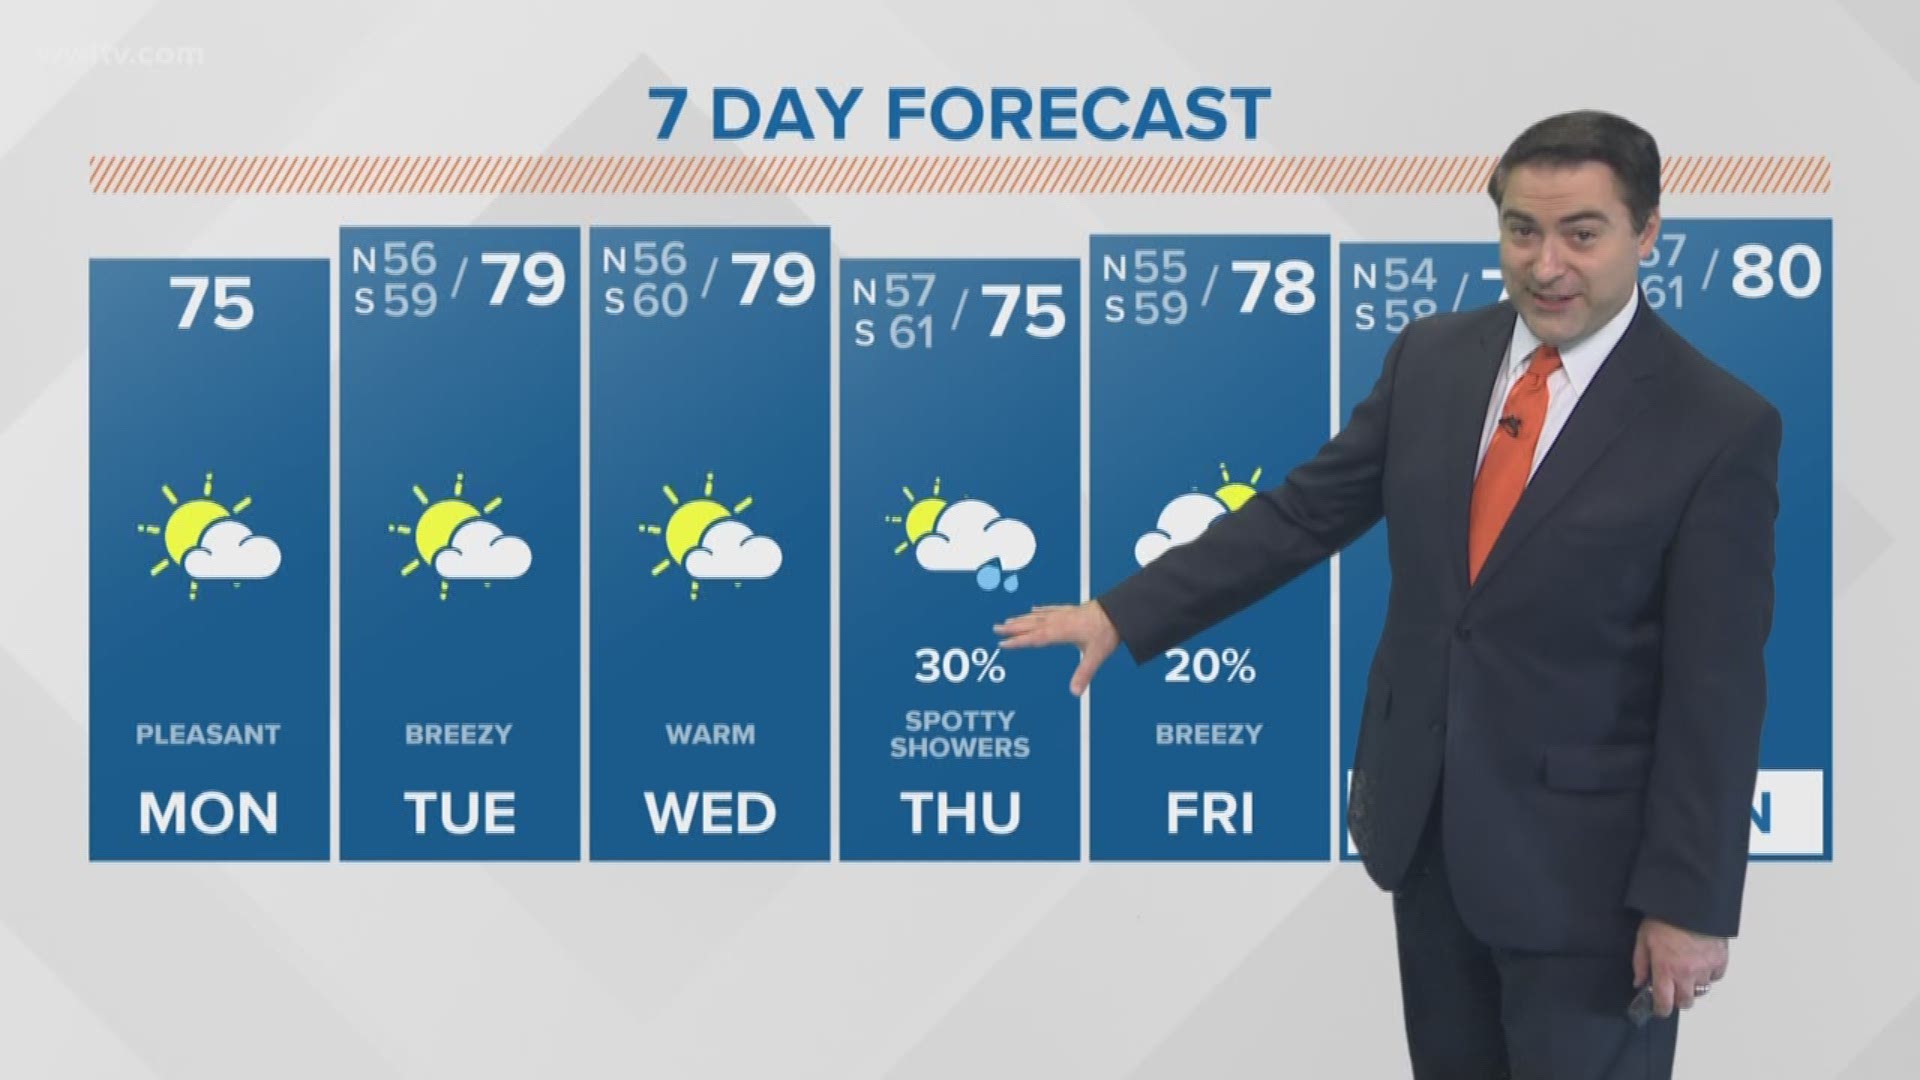 Meteorologist Dave Nussbaum says we will have a pleasant day with mild temperatures and low humidity.